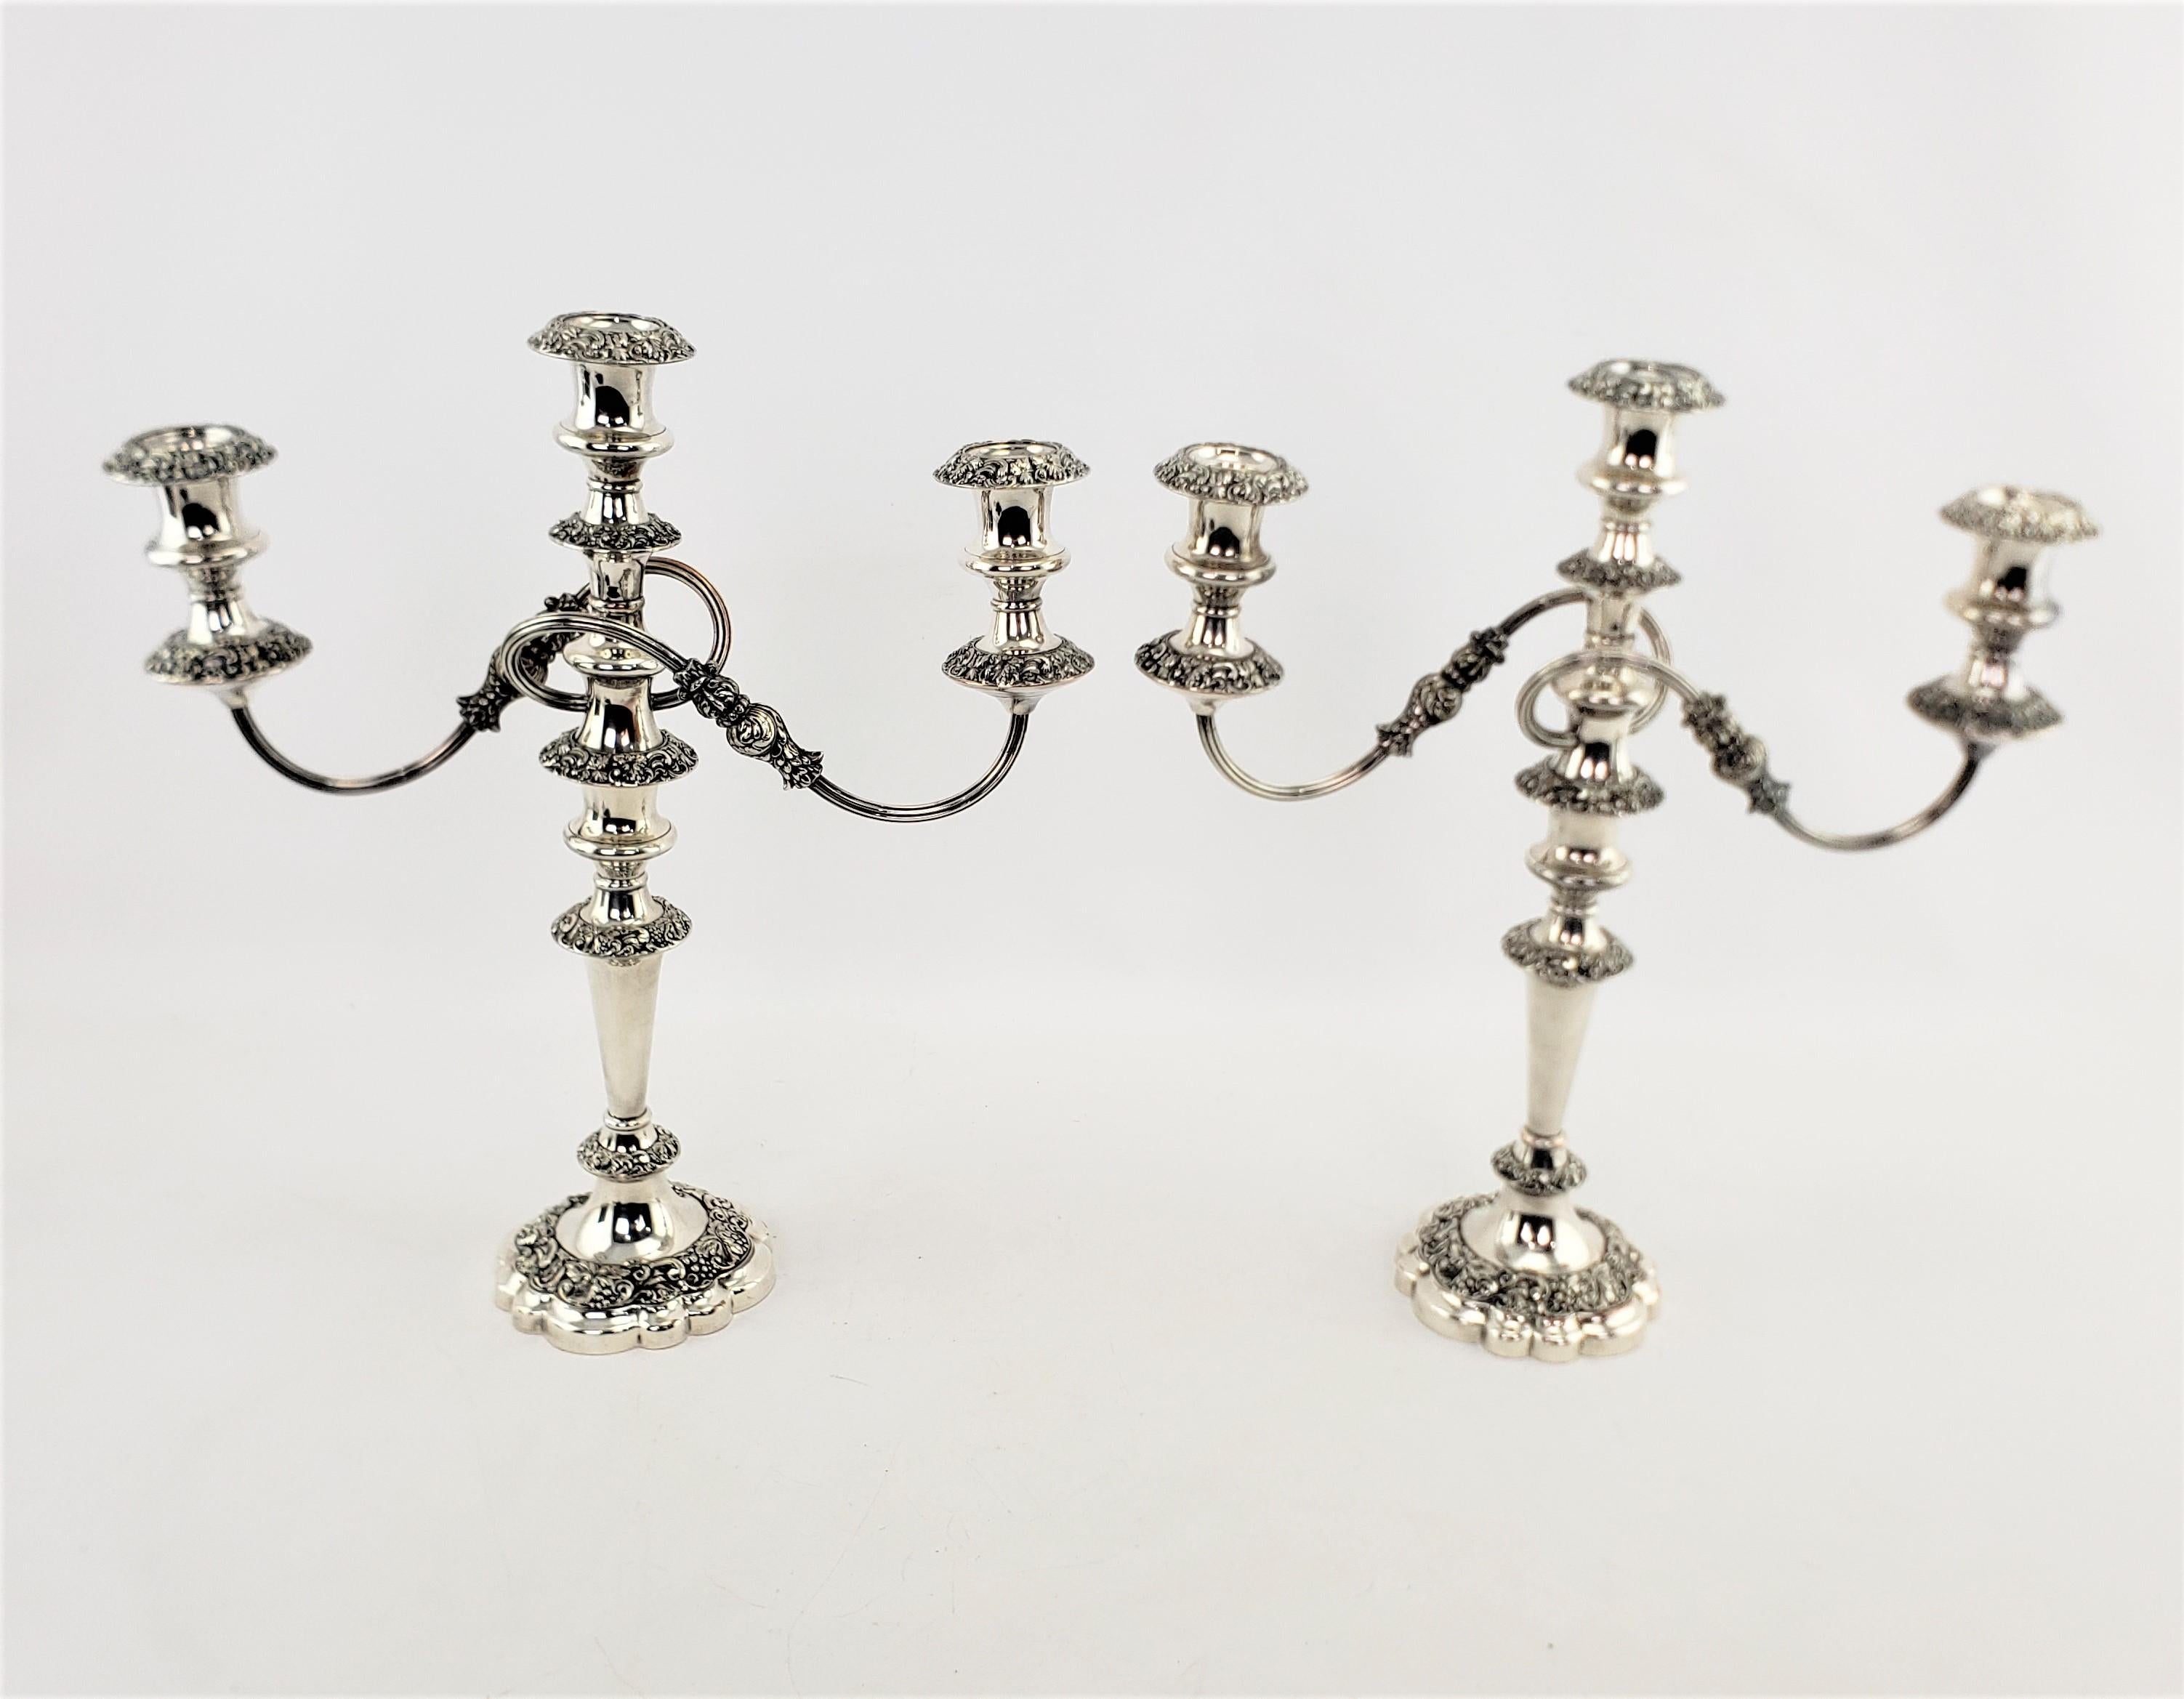 Pair of Antique Barker-Ellis Silver Plated Convertible Candelabras/Candlesticks In Good Condition For Sale In Hamilton, Ontario